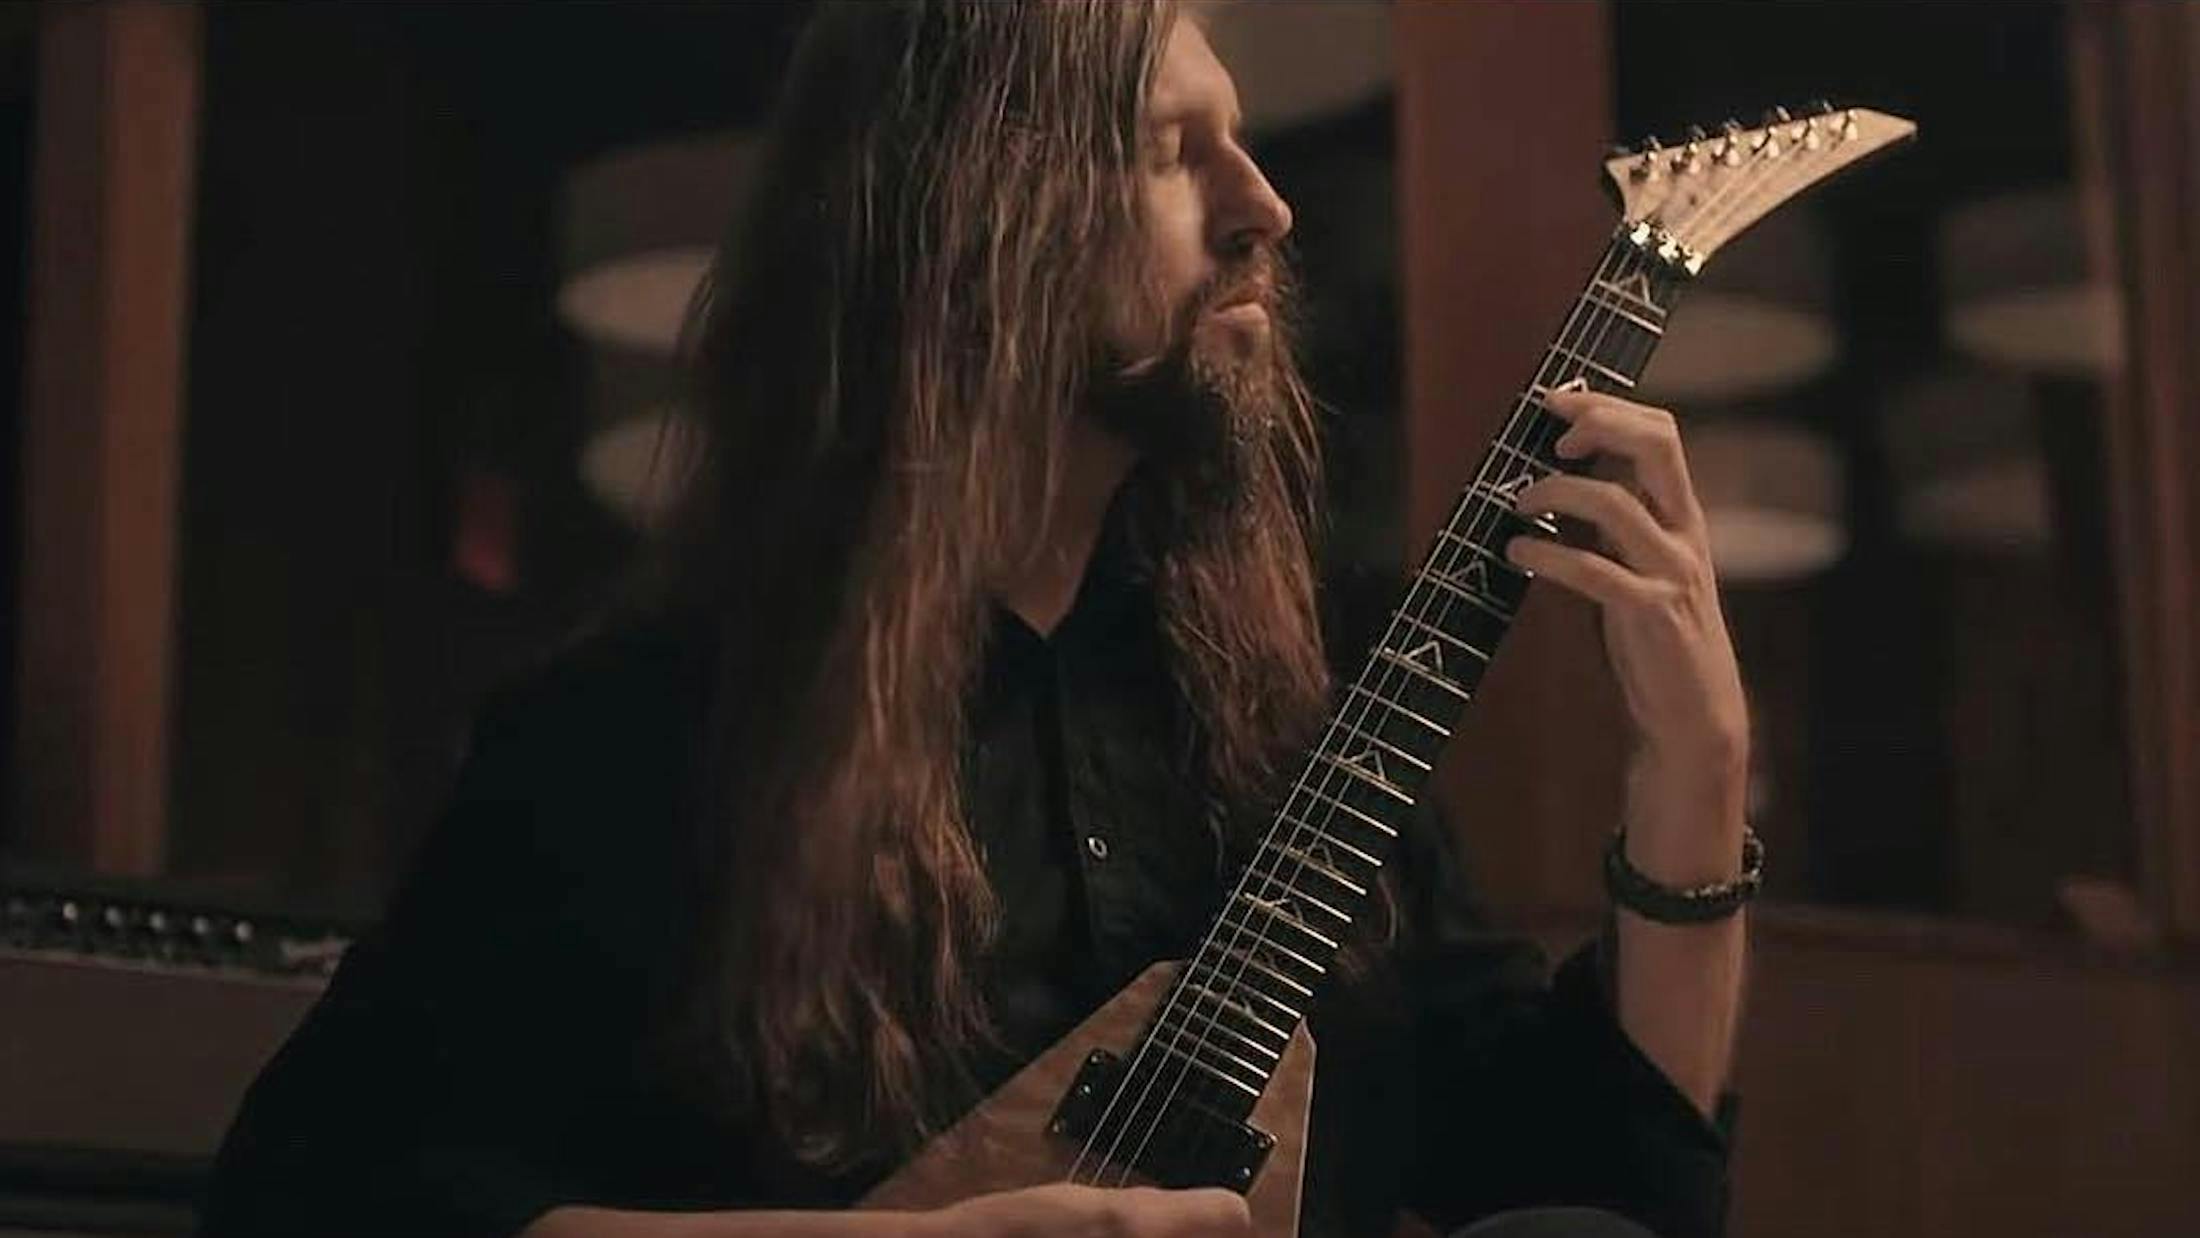 All That Remains Guitarist Oli Herbert Died Following An Accident At His Home